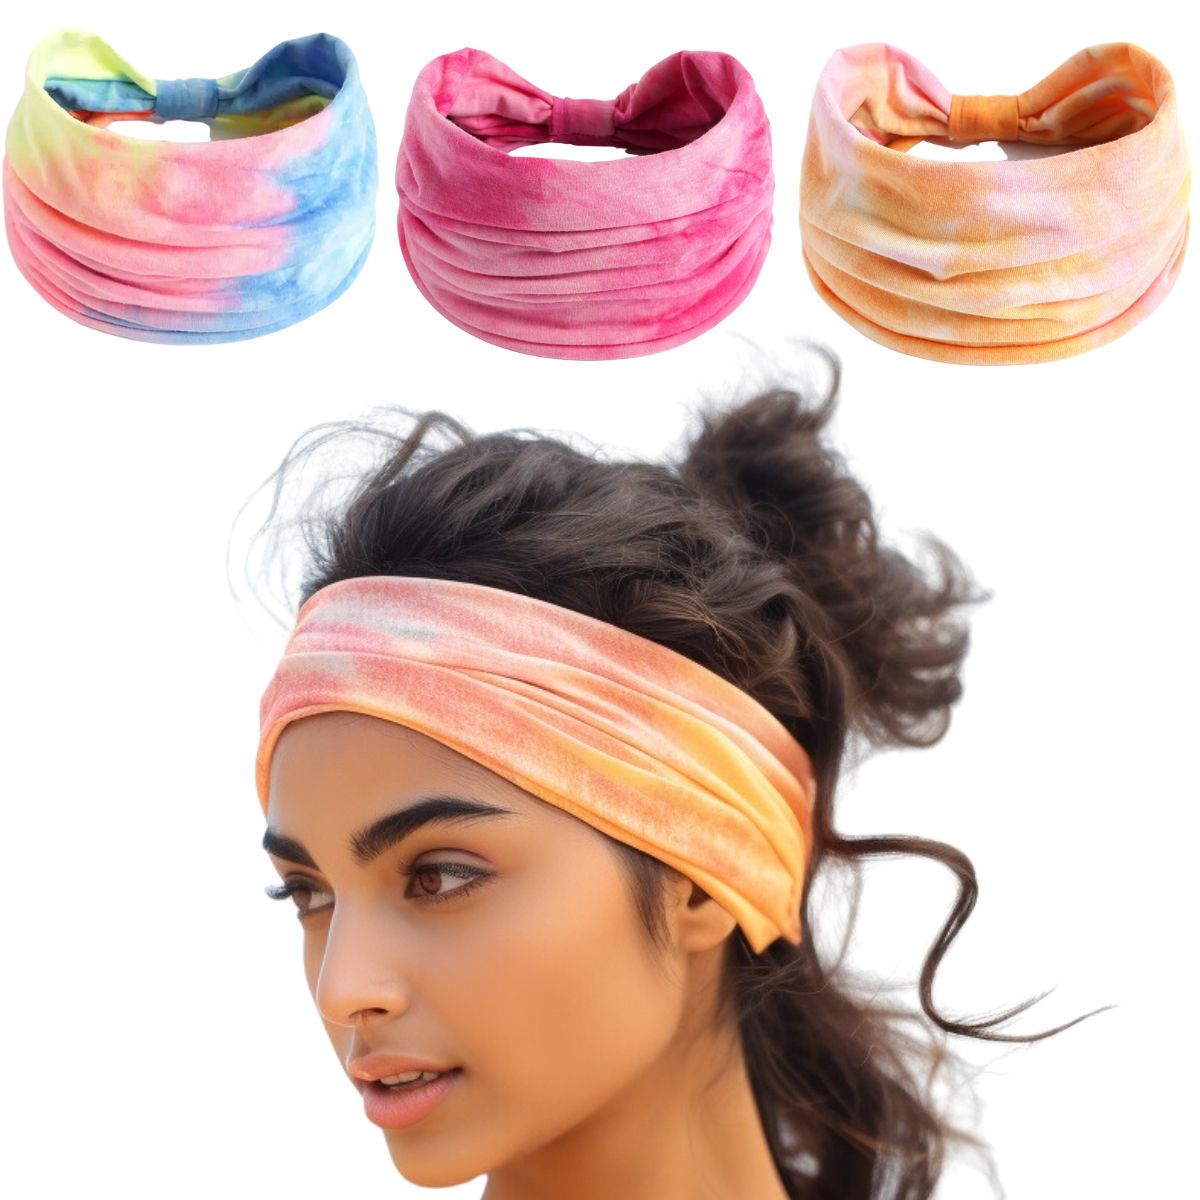  Pack of 3 XFyt super soft wide Tie Dye sweat workout gym sports hairband for women girls